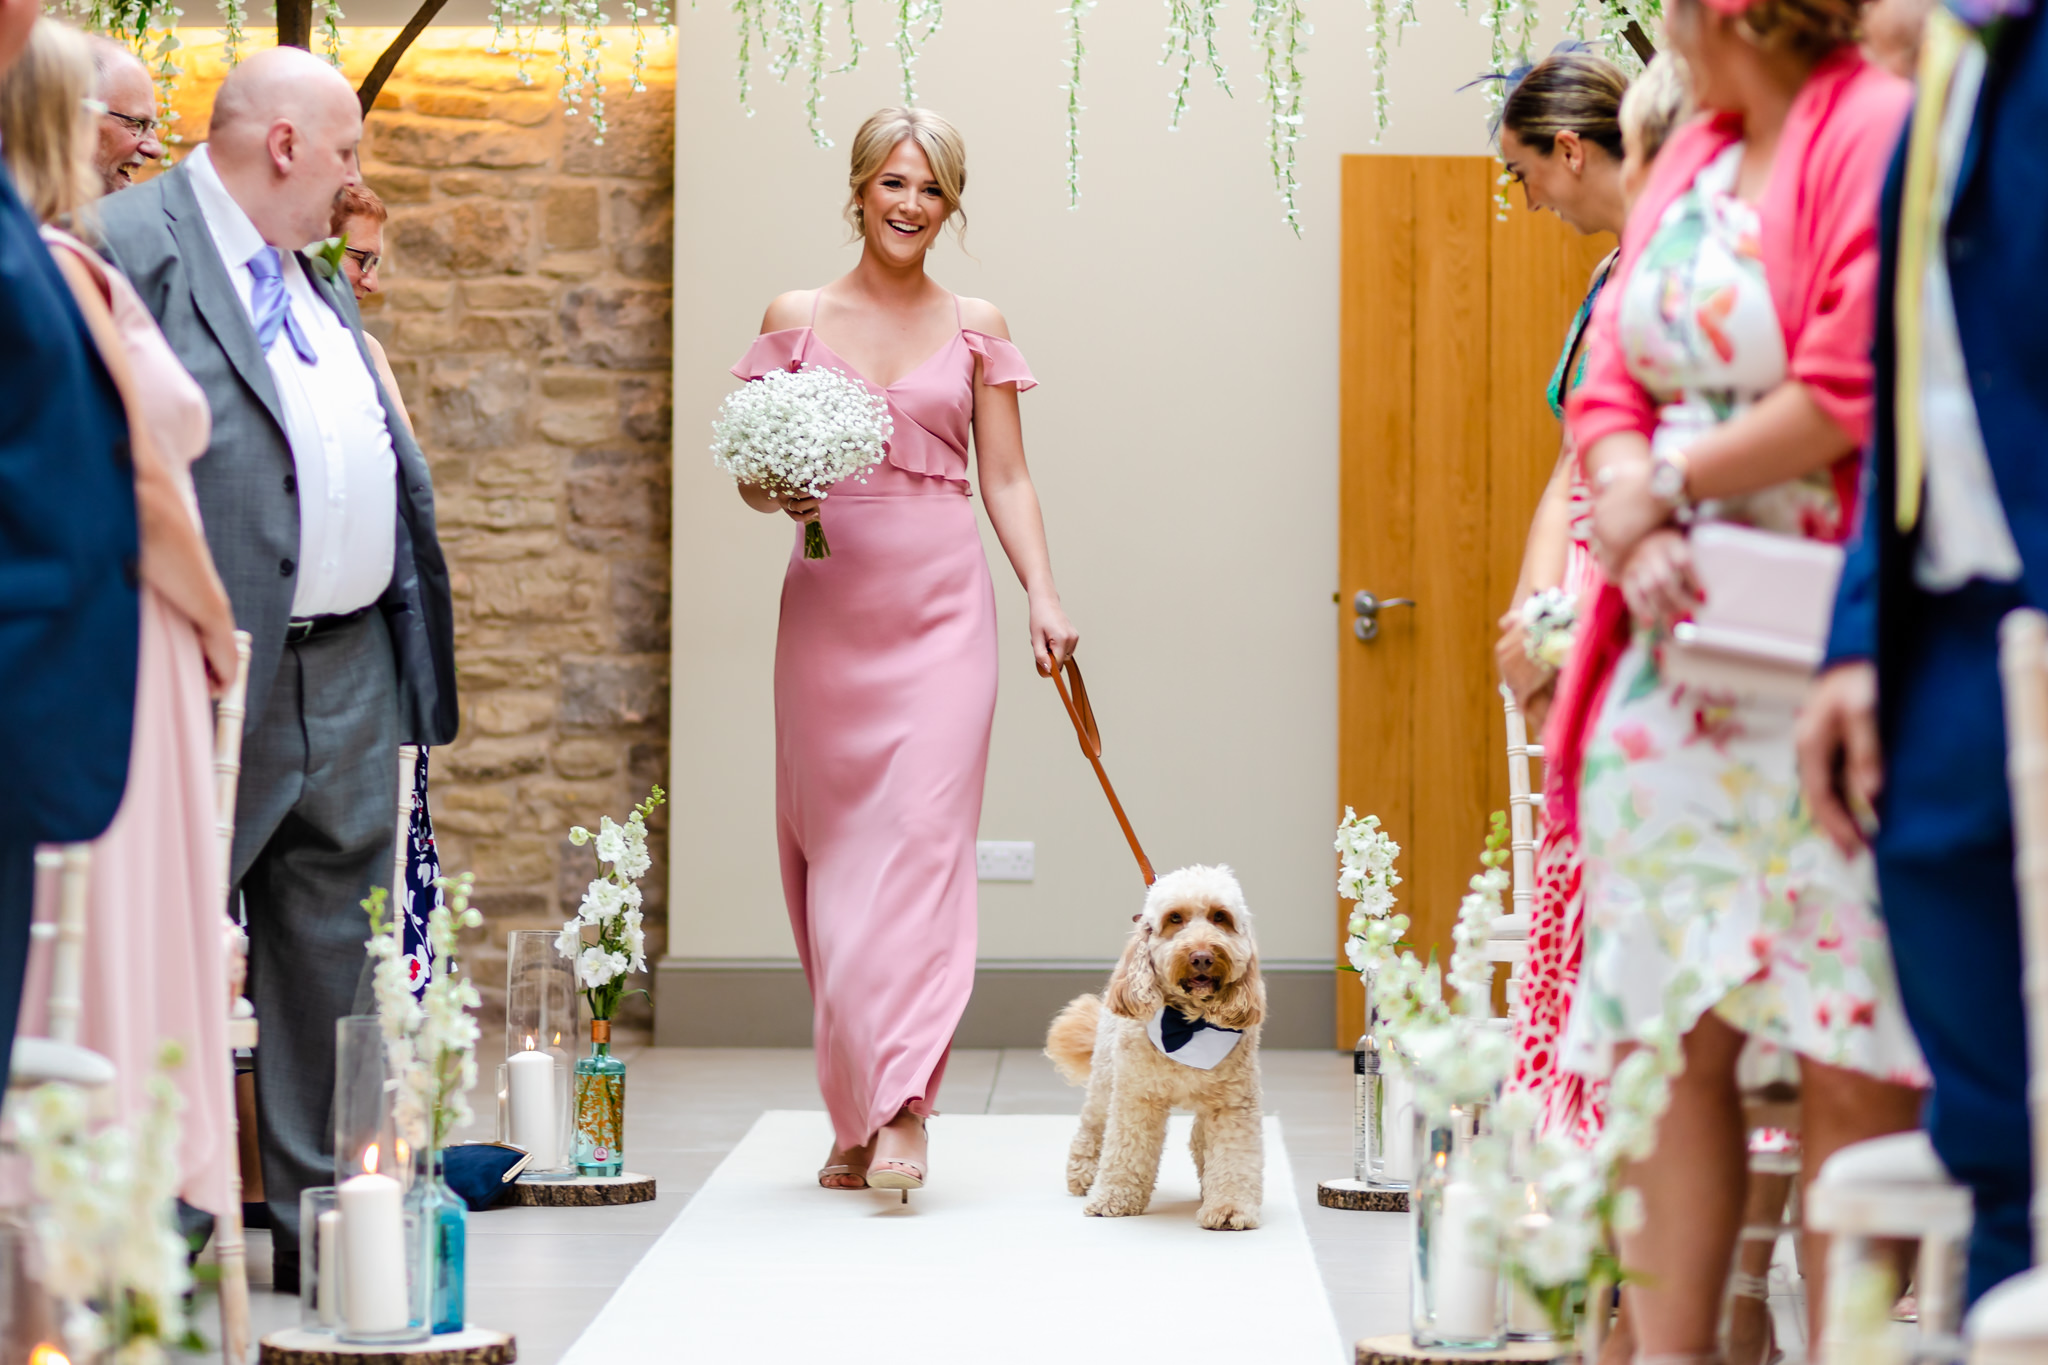 Dogs at Weddings - Walking with bridesmaid down the aisle